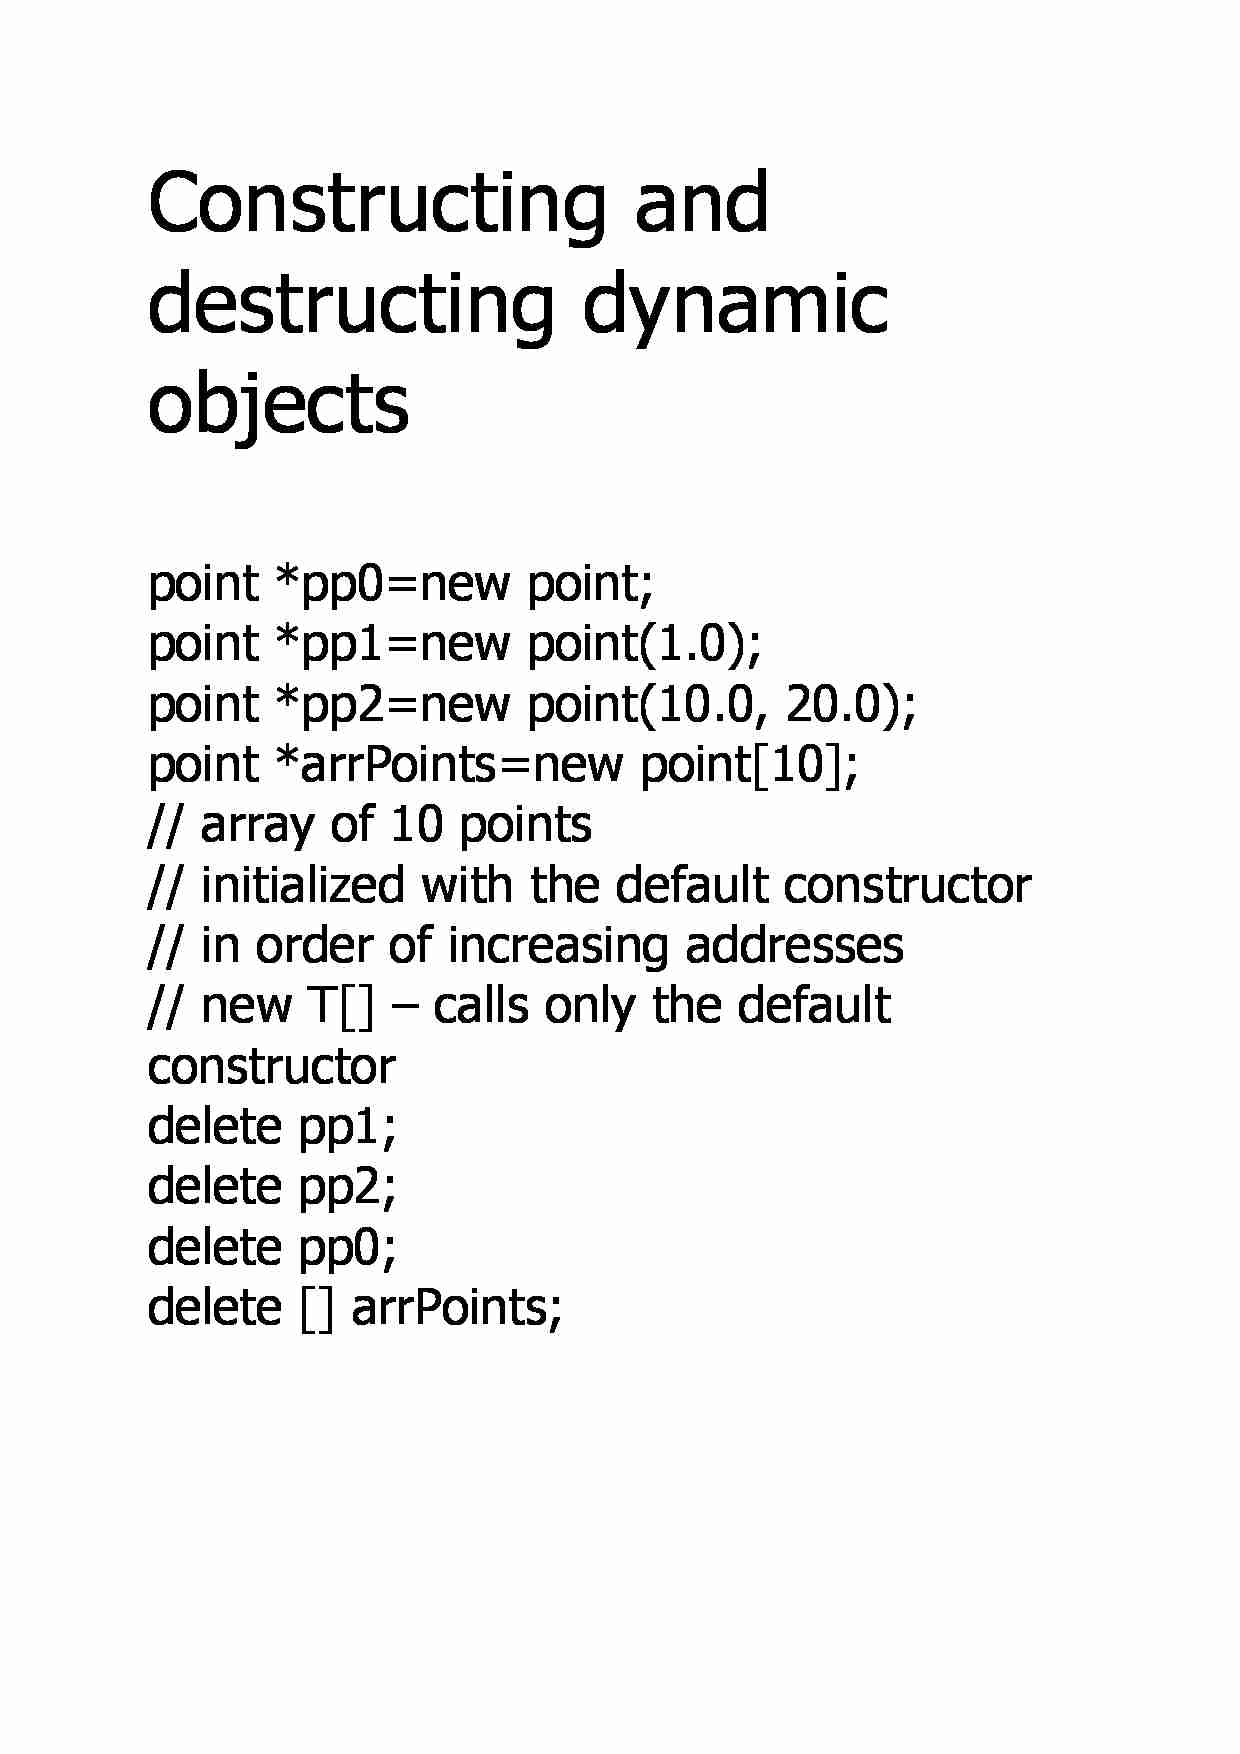 Constructing and destructing dynamic objects - strona 1